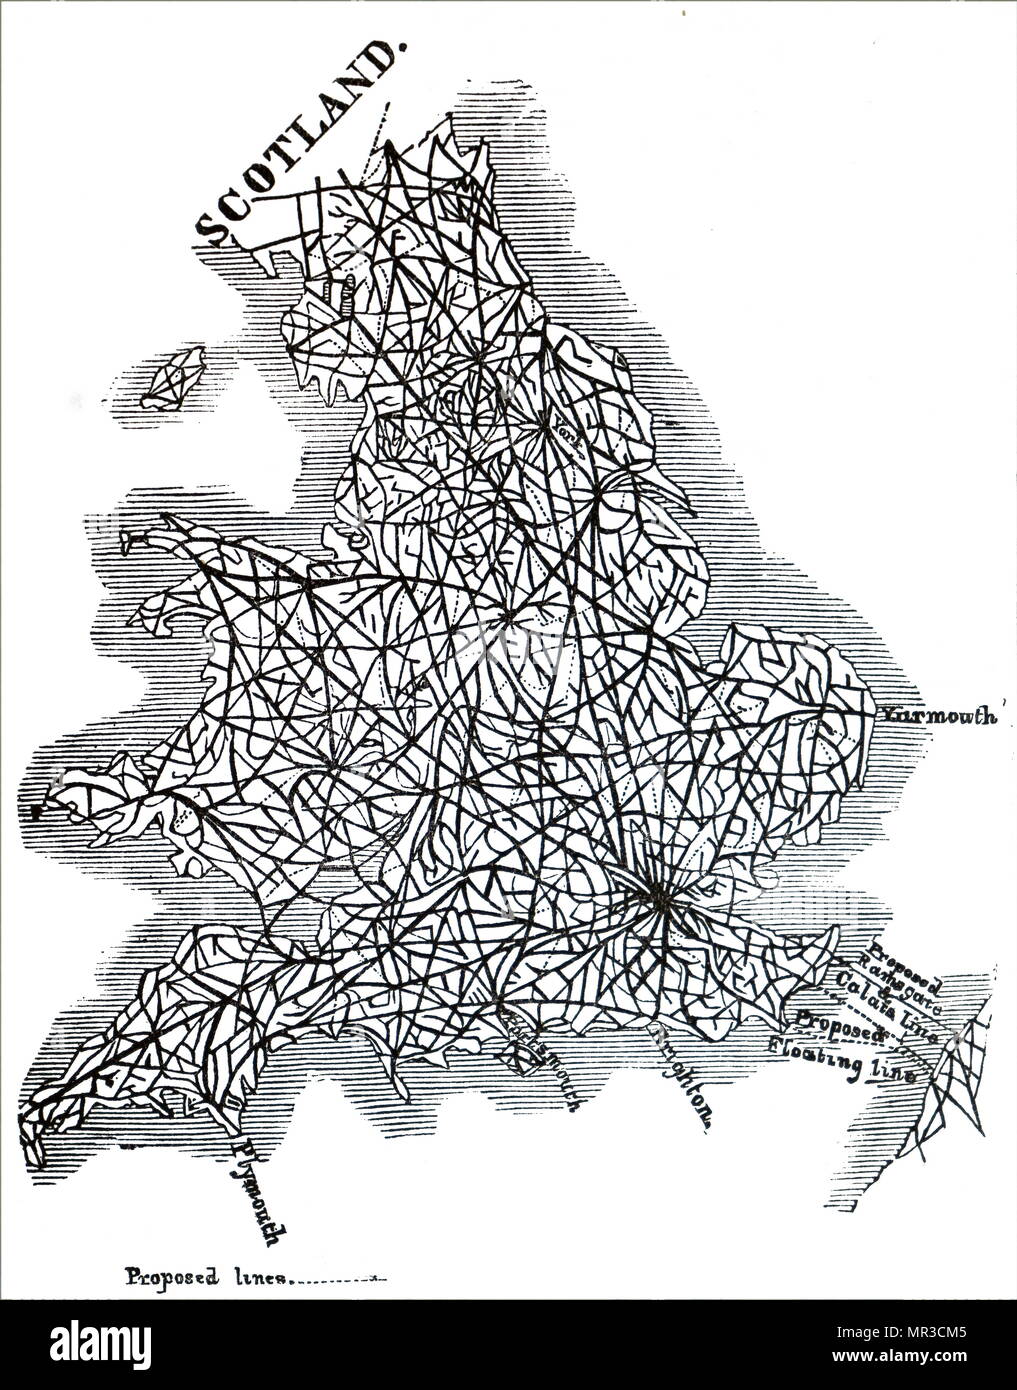 Map of proposed railway lines to run through Britain. Dated 19th century Stock Photo